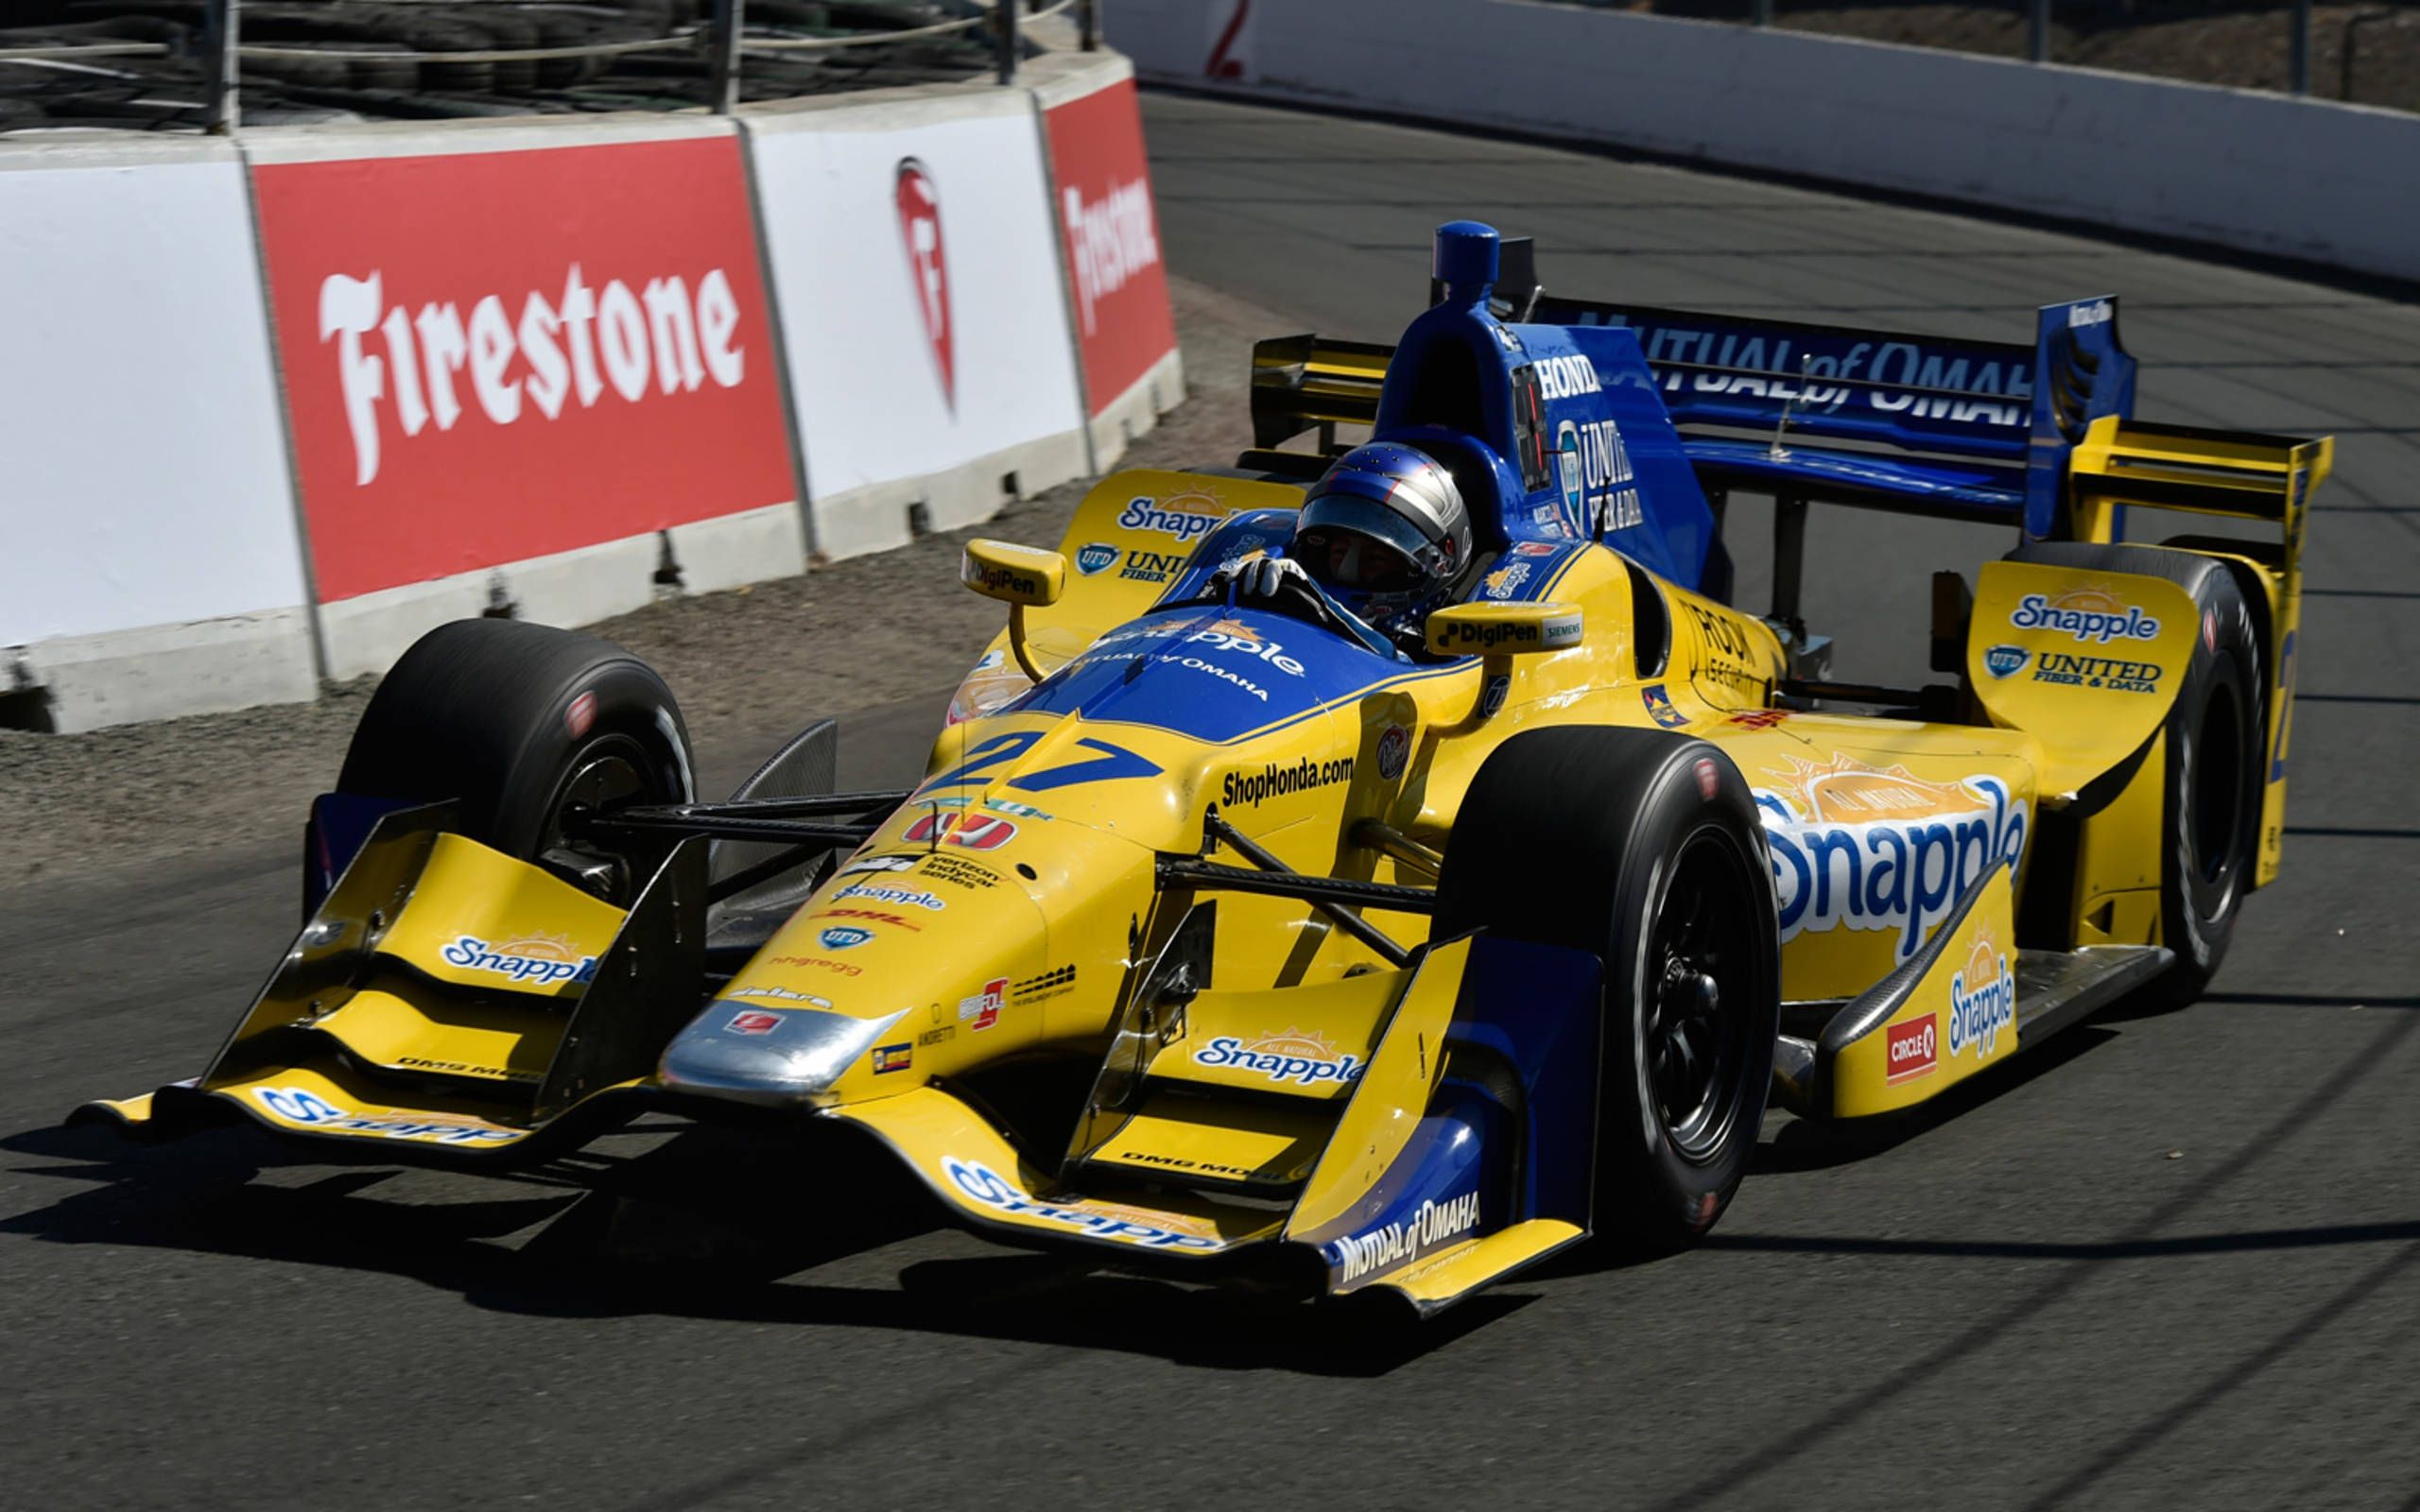 Marco Andretti Plans On Less Thinking More Smiling In 17 Indycar Season